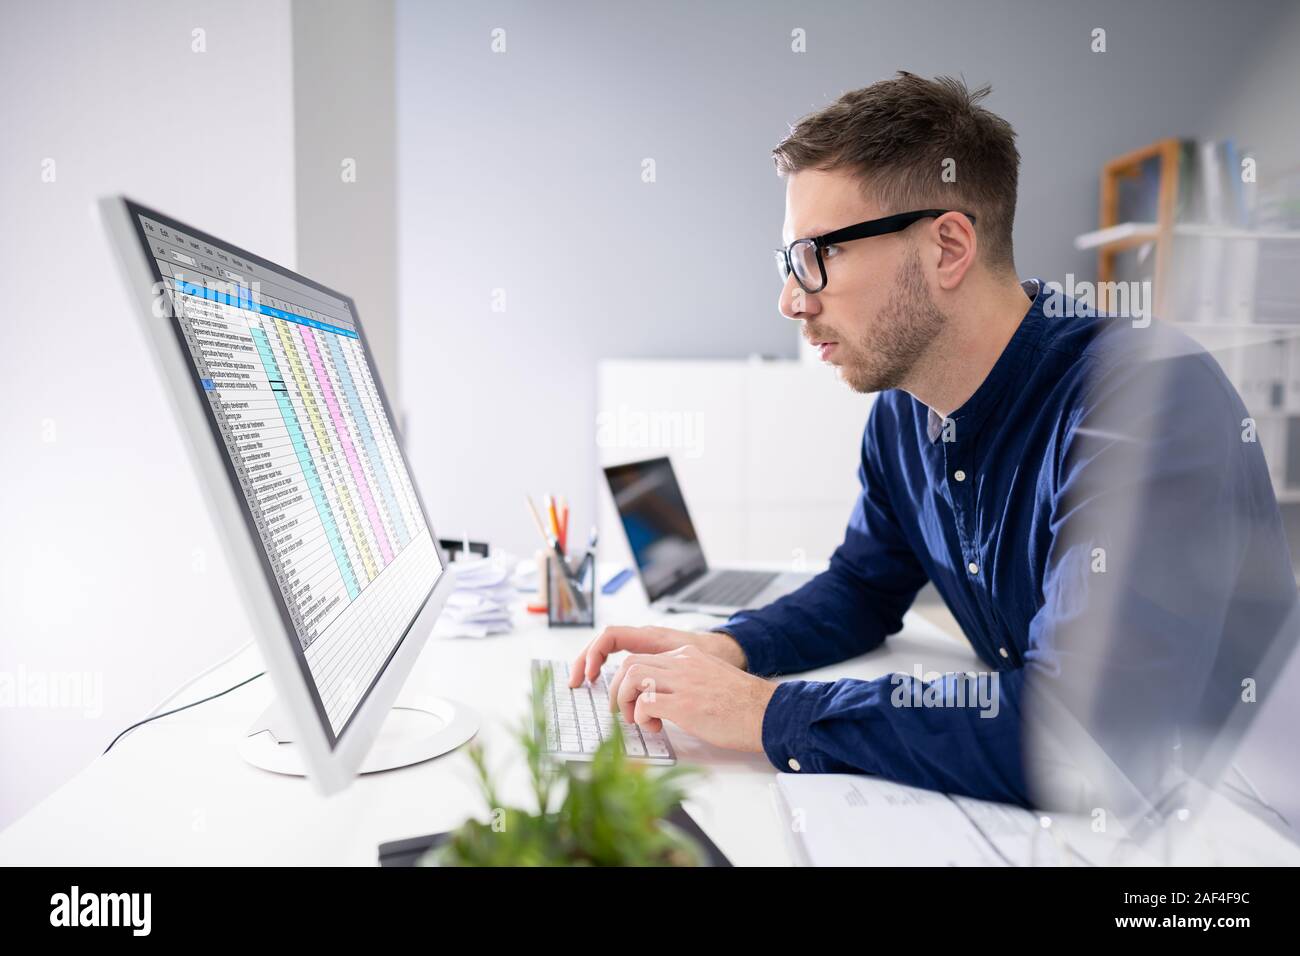 Side View Of Businessman's Hand Analyzing Data On Computer Over Desk Stock Photo